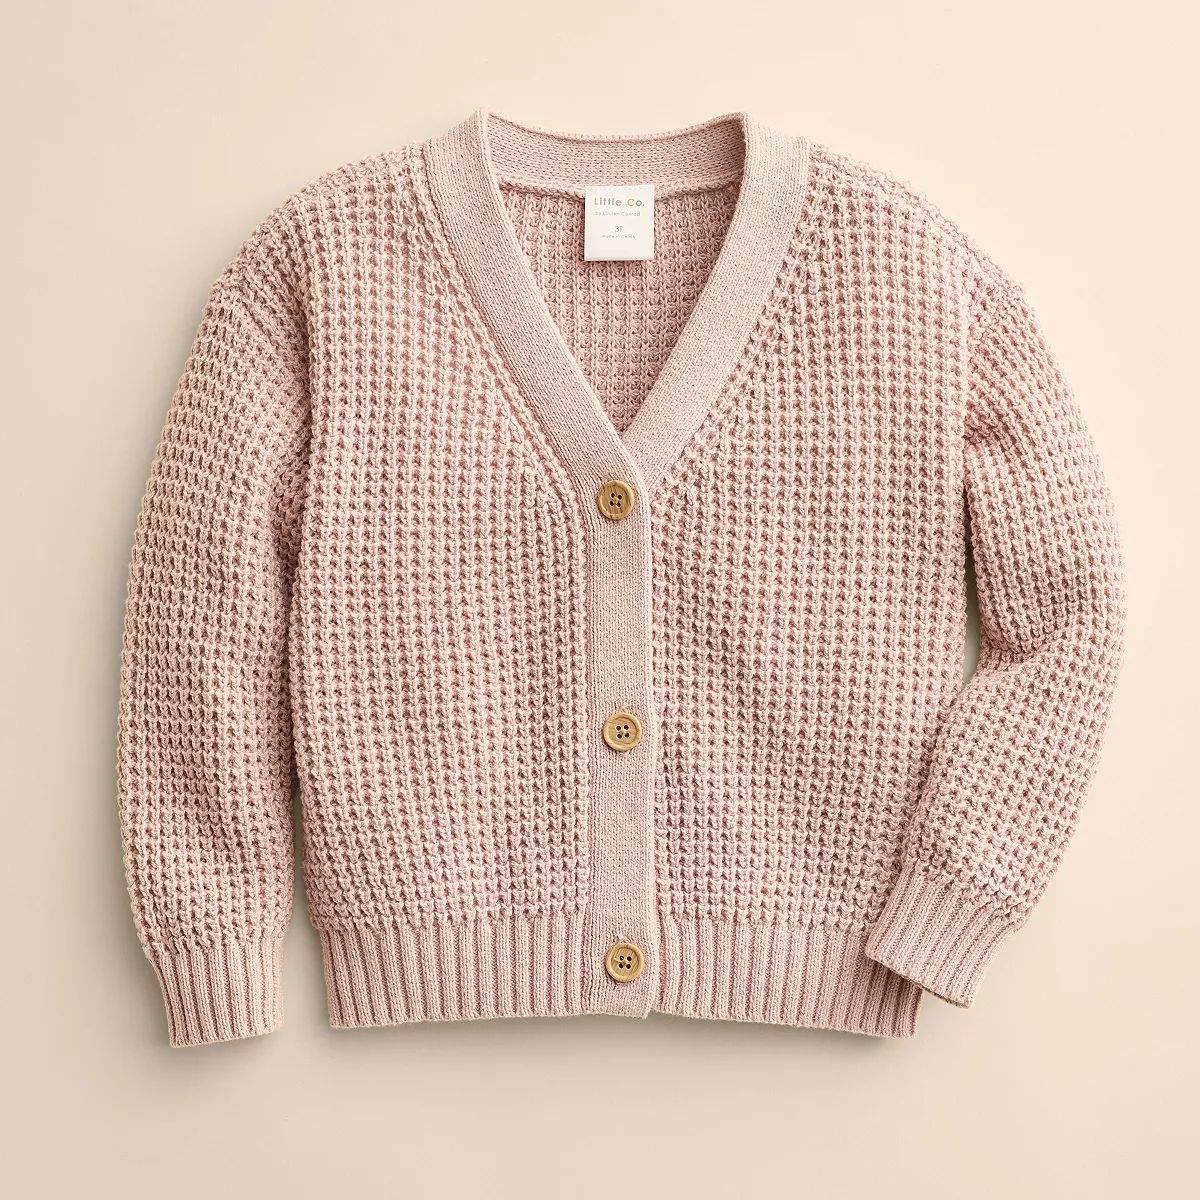 Kids 4-12 Little Co. by Lauren Conrad Relaxed Waffle Cardigan | Kohl's